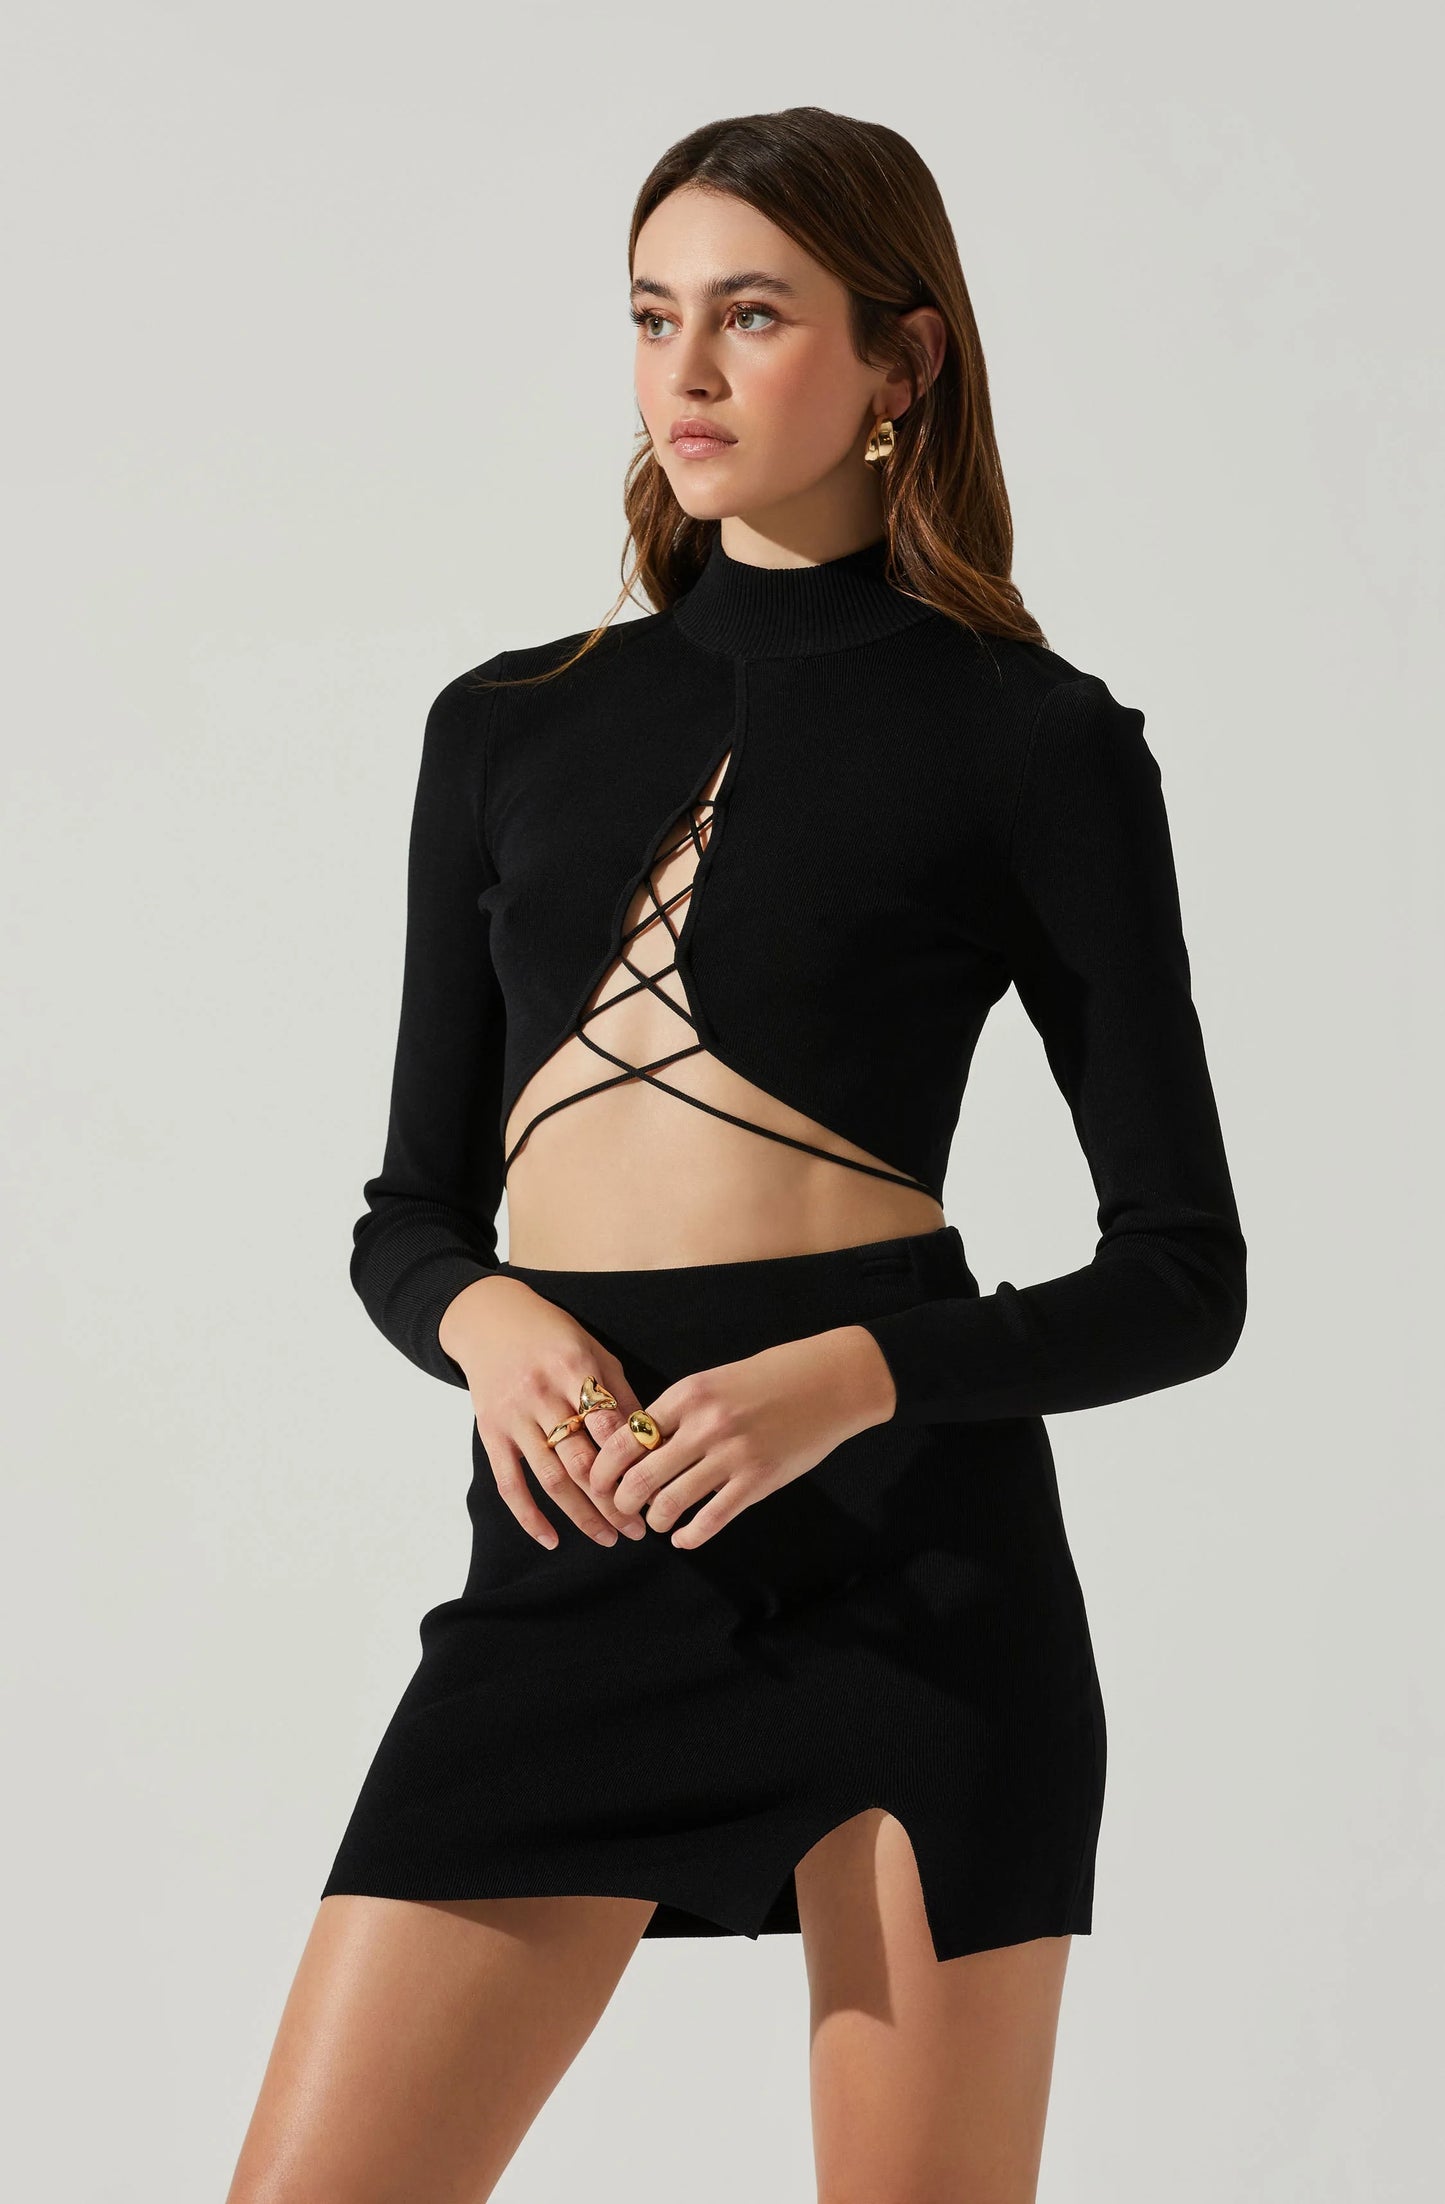 Raven Cropped Tie Top